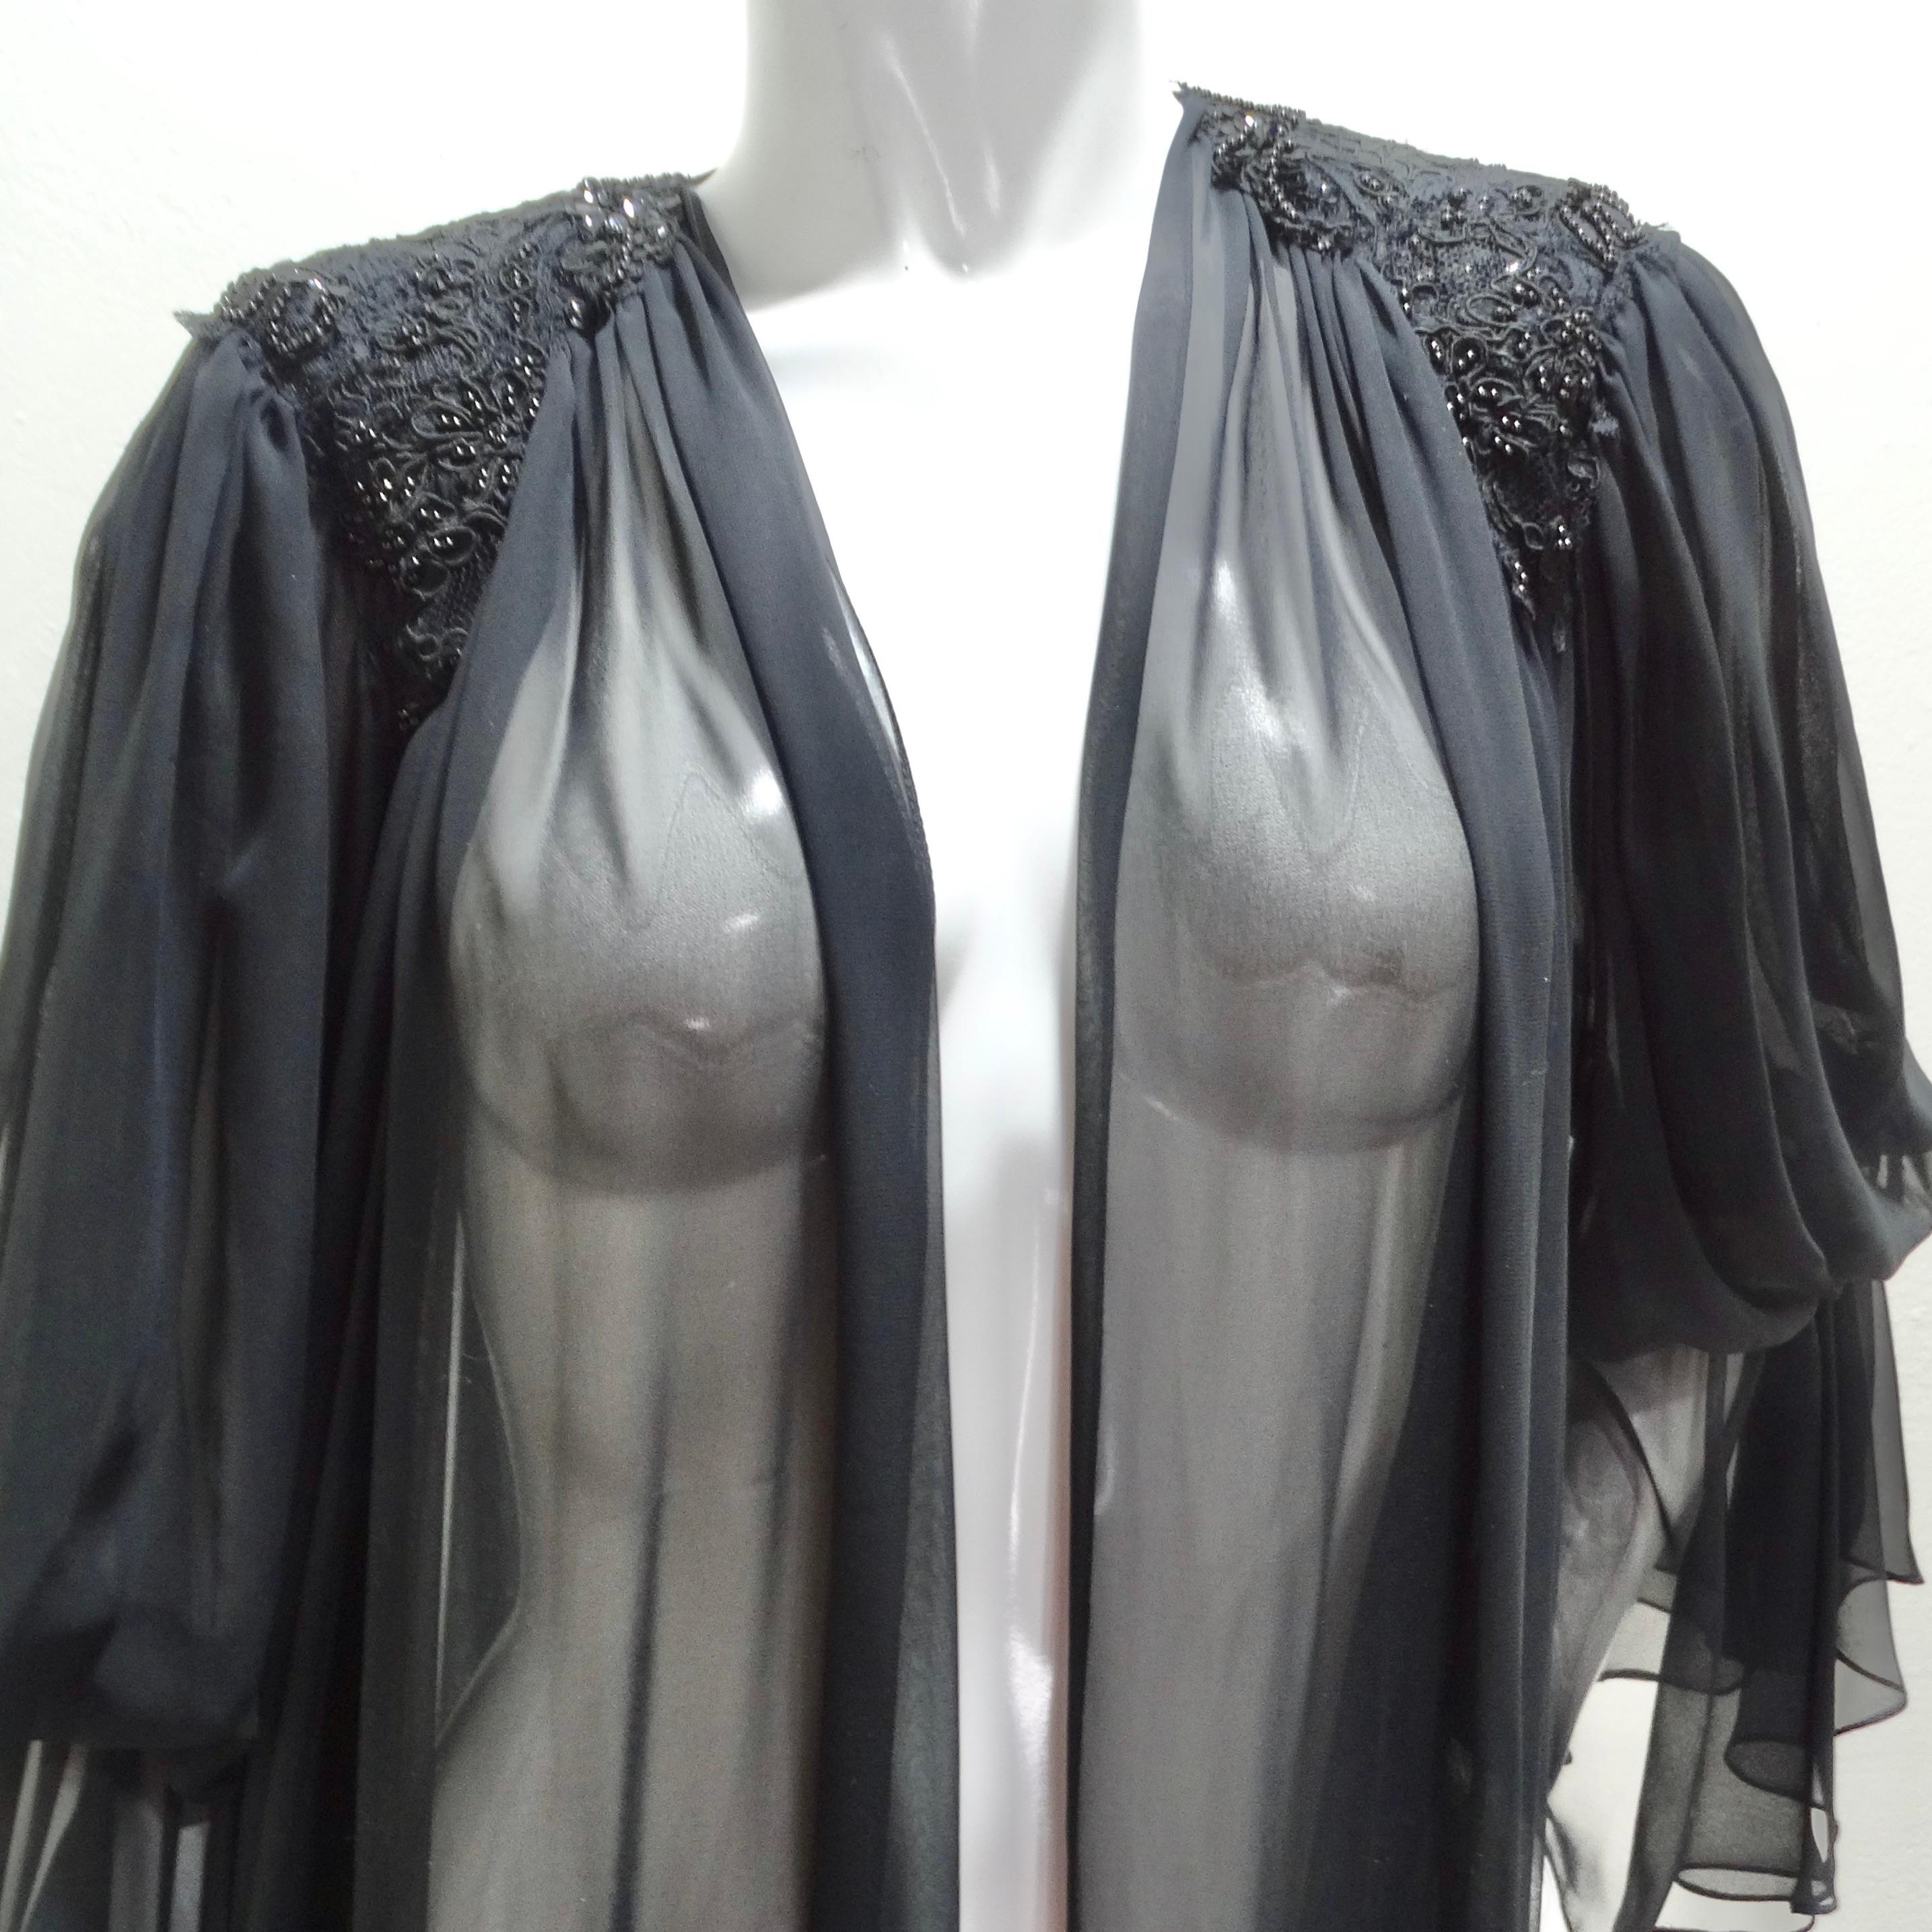 Introducing the 1980s Black Sheer Embellished Robe – a gorgeous and statement-making piece that exudes vintage charm and luxury. This robe is crafted from a black silky sheer fabric, featuring stunning billowing sleeves and intricate black bead